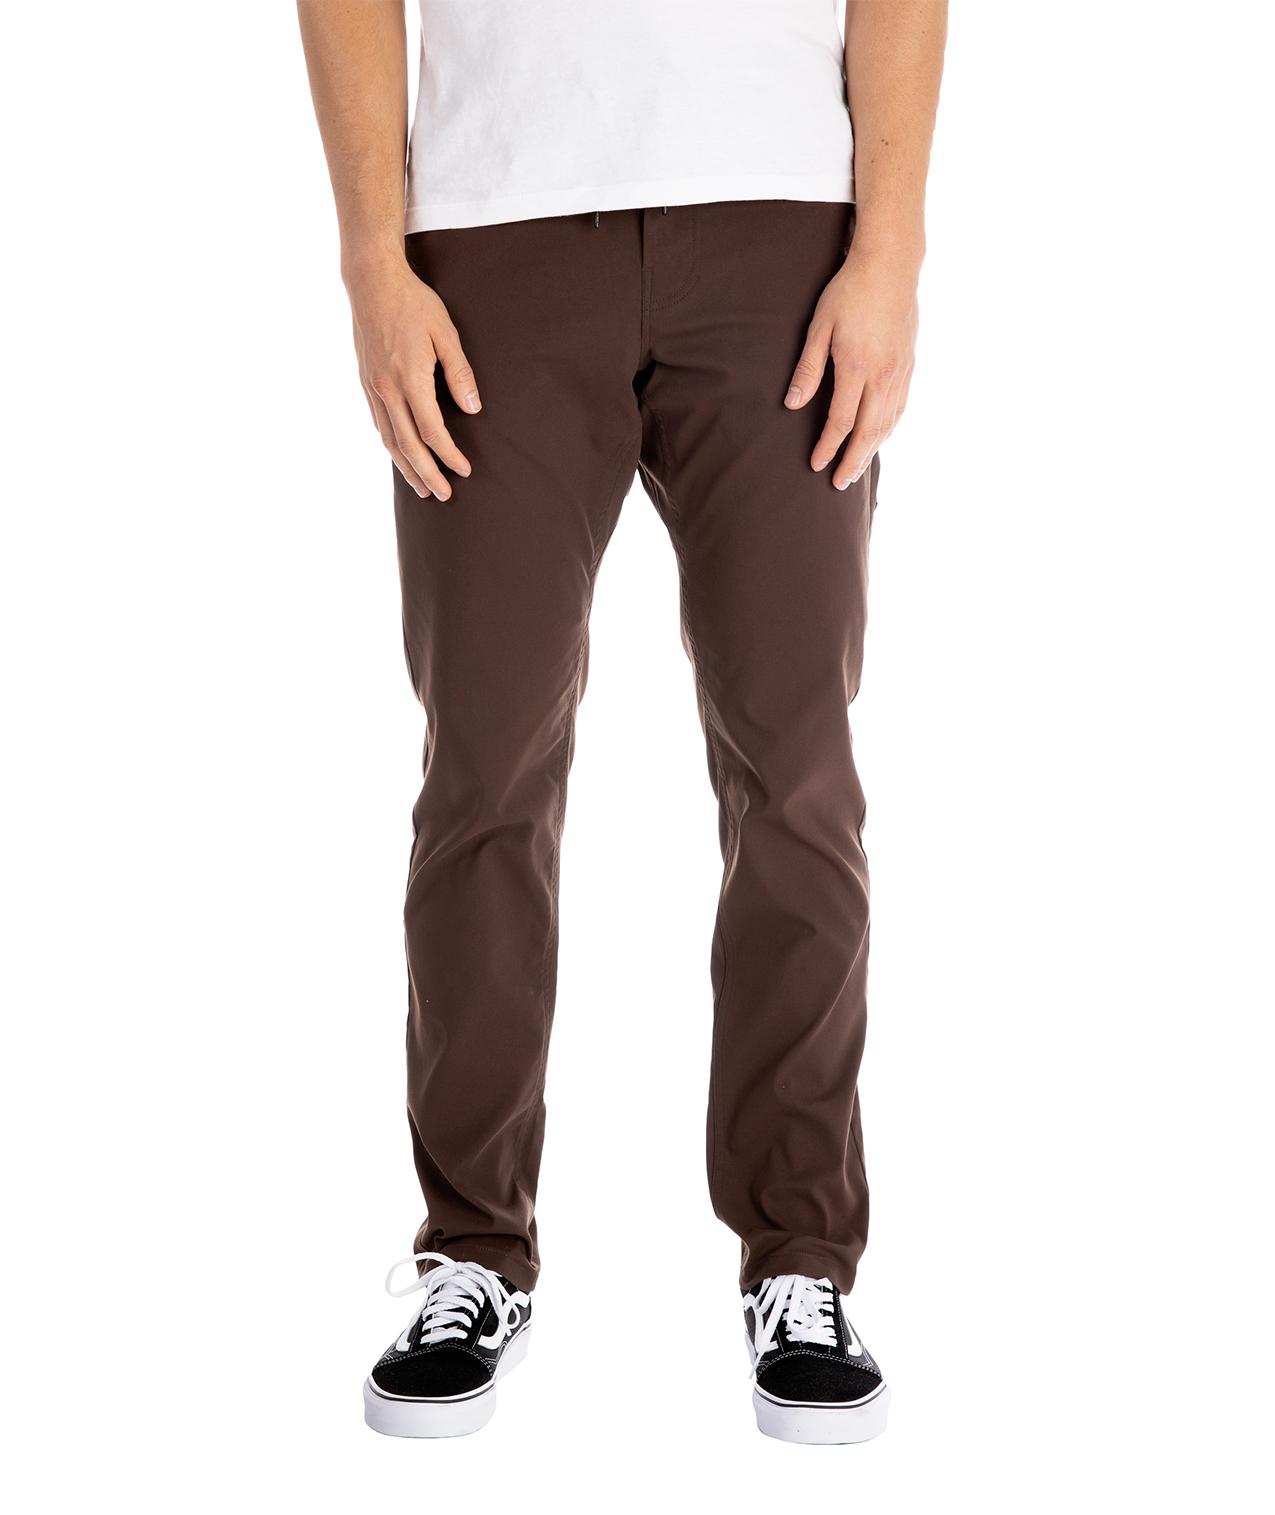 686 Everywhere Slim Fit Pant - Coffee ― Canada's Online Skate Shop